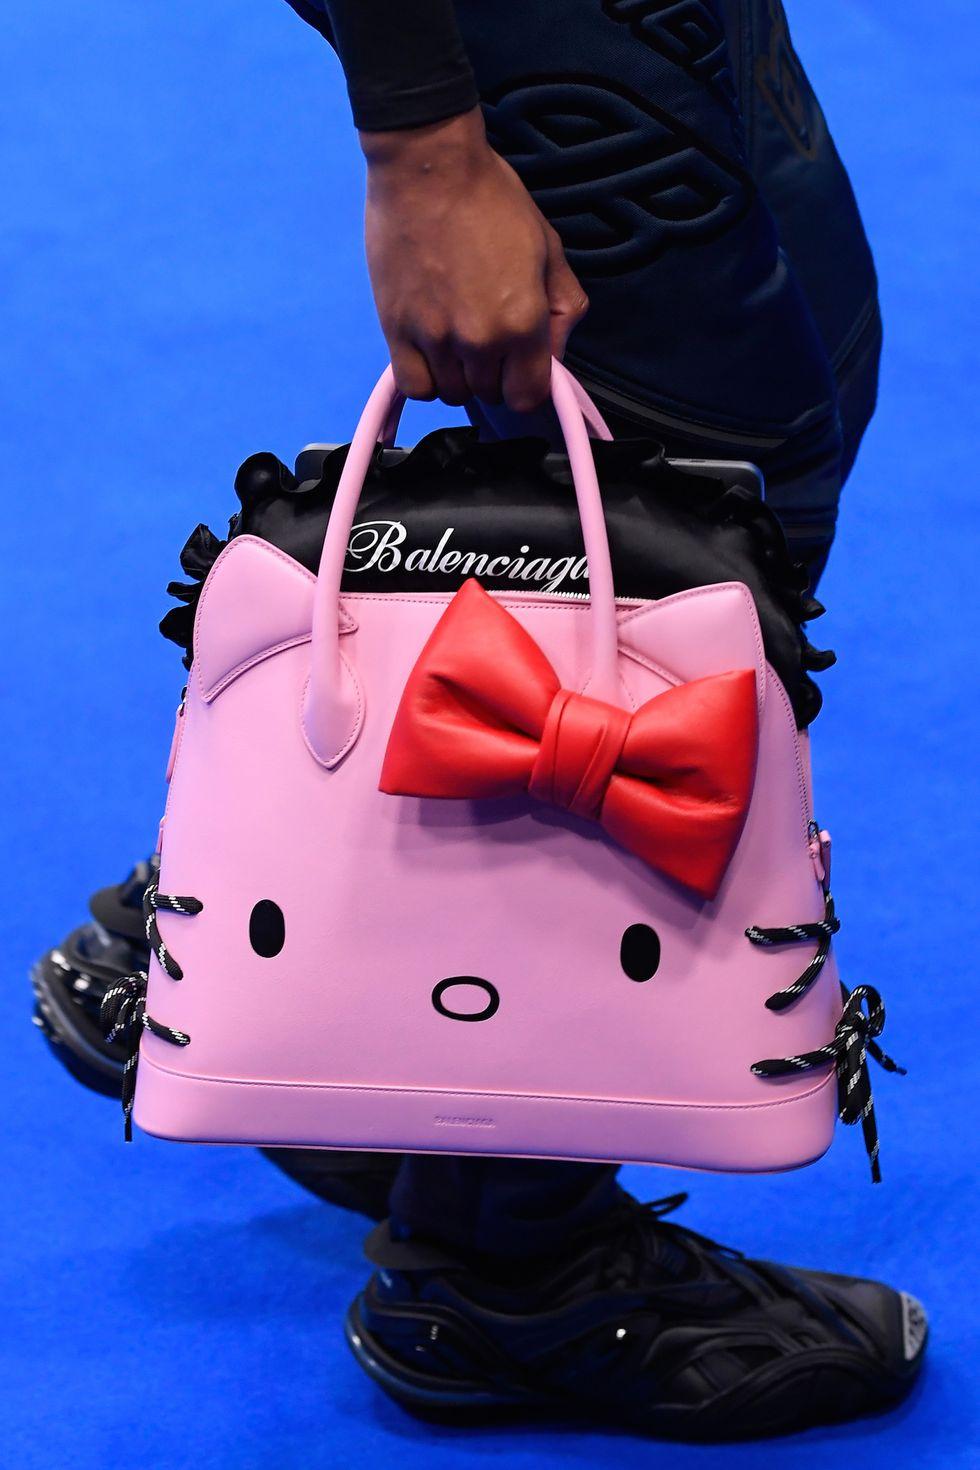 Balenciaga HELLO KITTY Baby Pink color  Ville Handbag With Strap and tags 
Rare and  limited size.
Designed in collaboration with Hello Kitty, Balenciaga's bag is complete with ears, a bow and whiskers, which are created using the laces from the